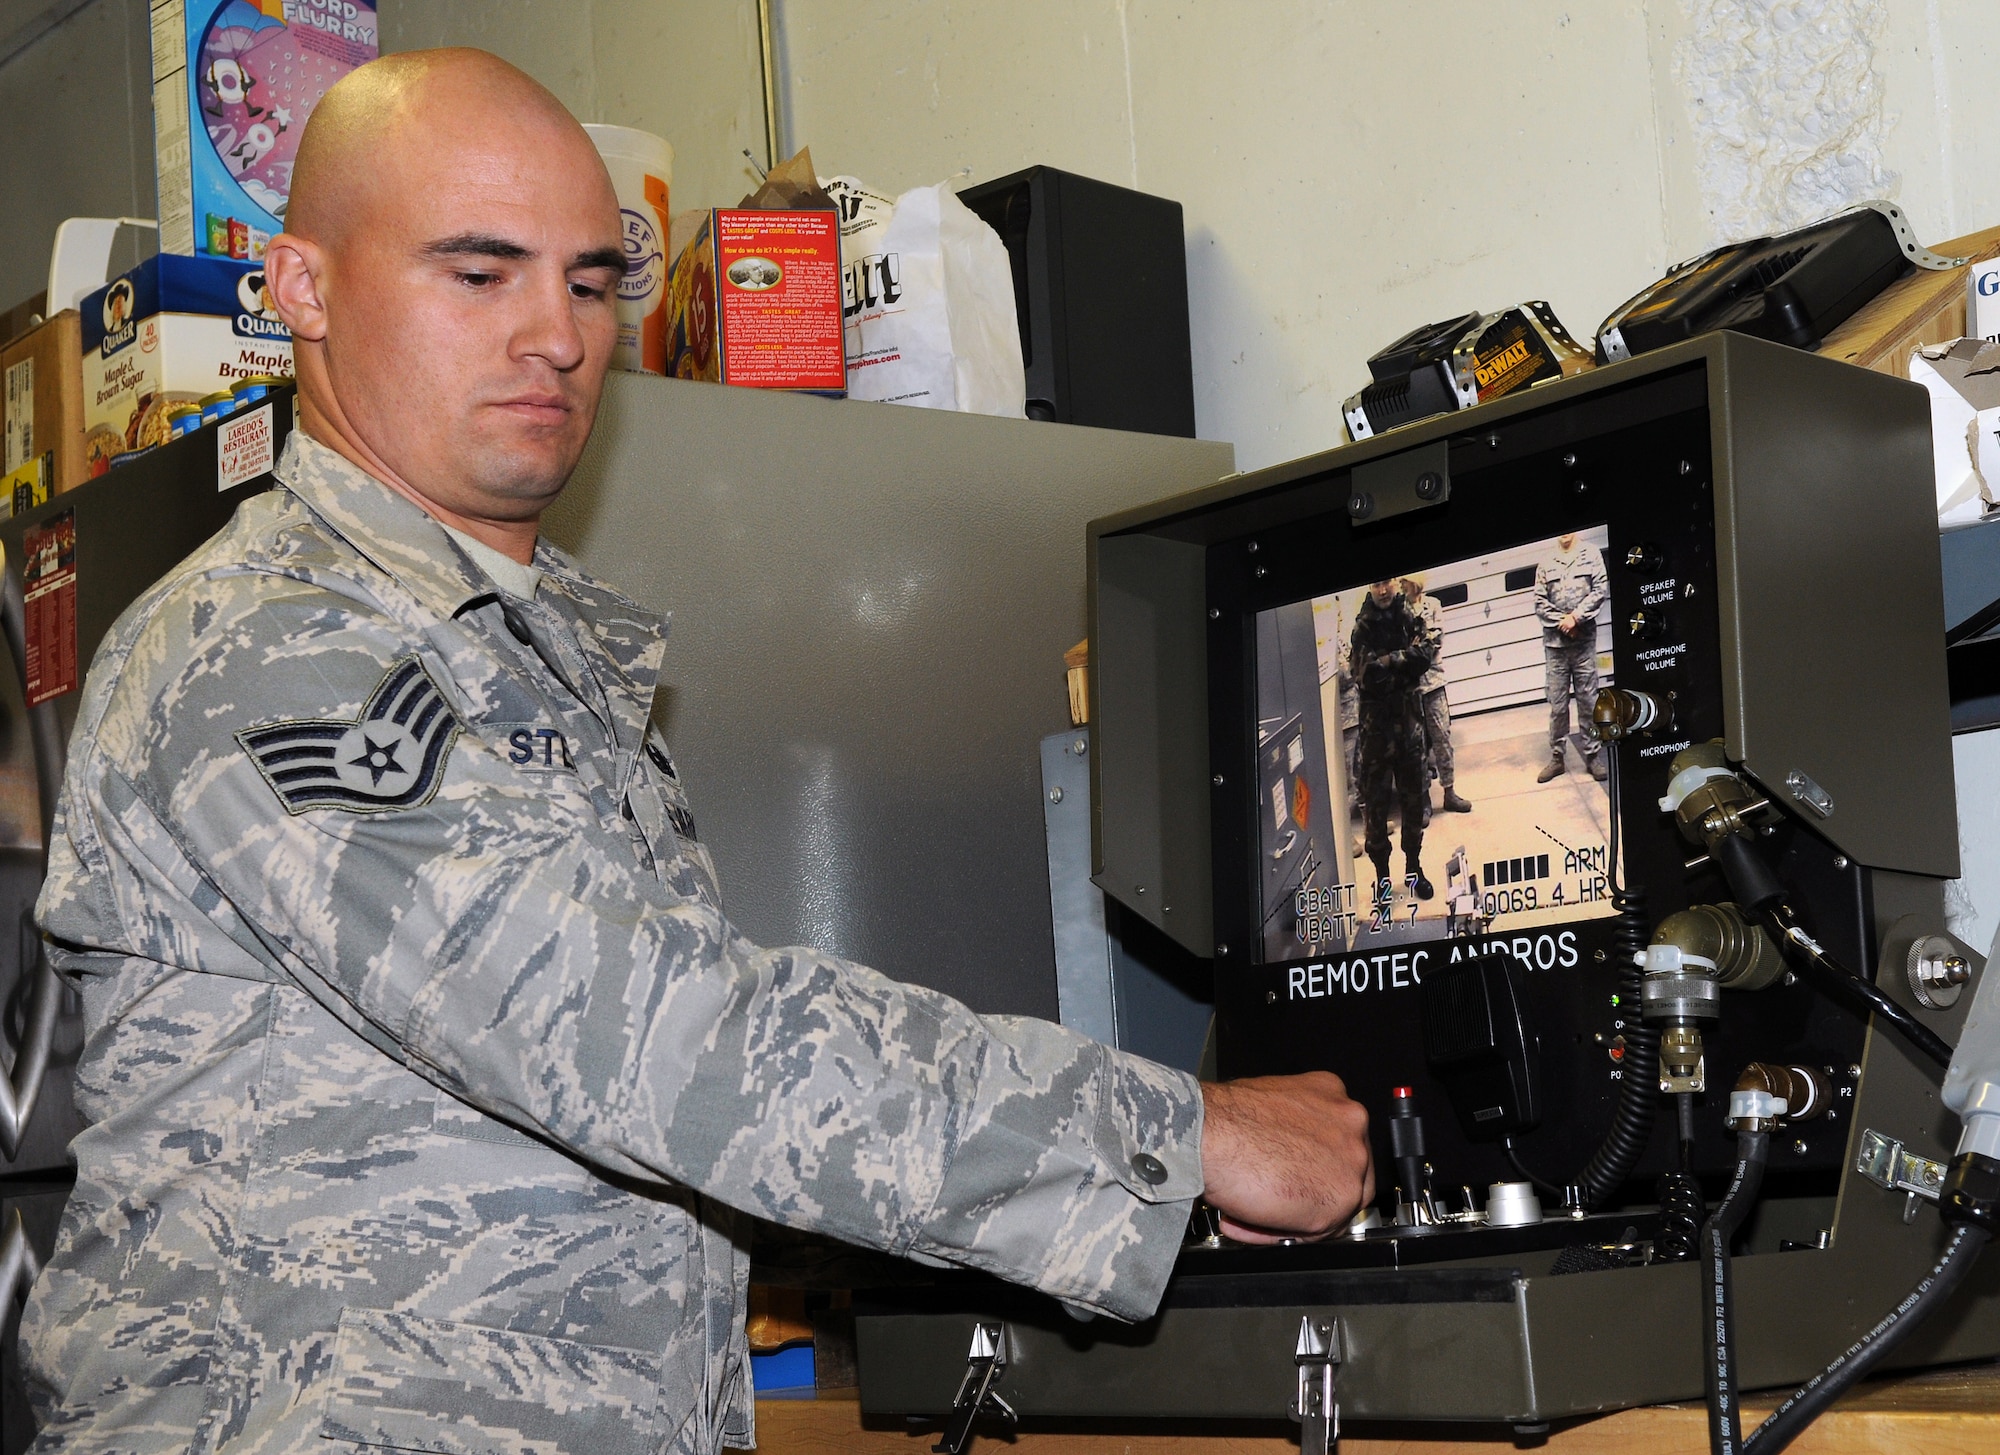 Operating a Remotec F-6A Andros Hazardous Duty Robot, Staff Sgt. Nicholas Stehling shows off a recently acquired piece of equipment designed to assist explosive ordnance disposal personnel get the job done safely. (U.S. Air Force photo by Master Sgt. Paul Gorman)